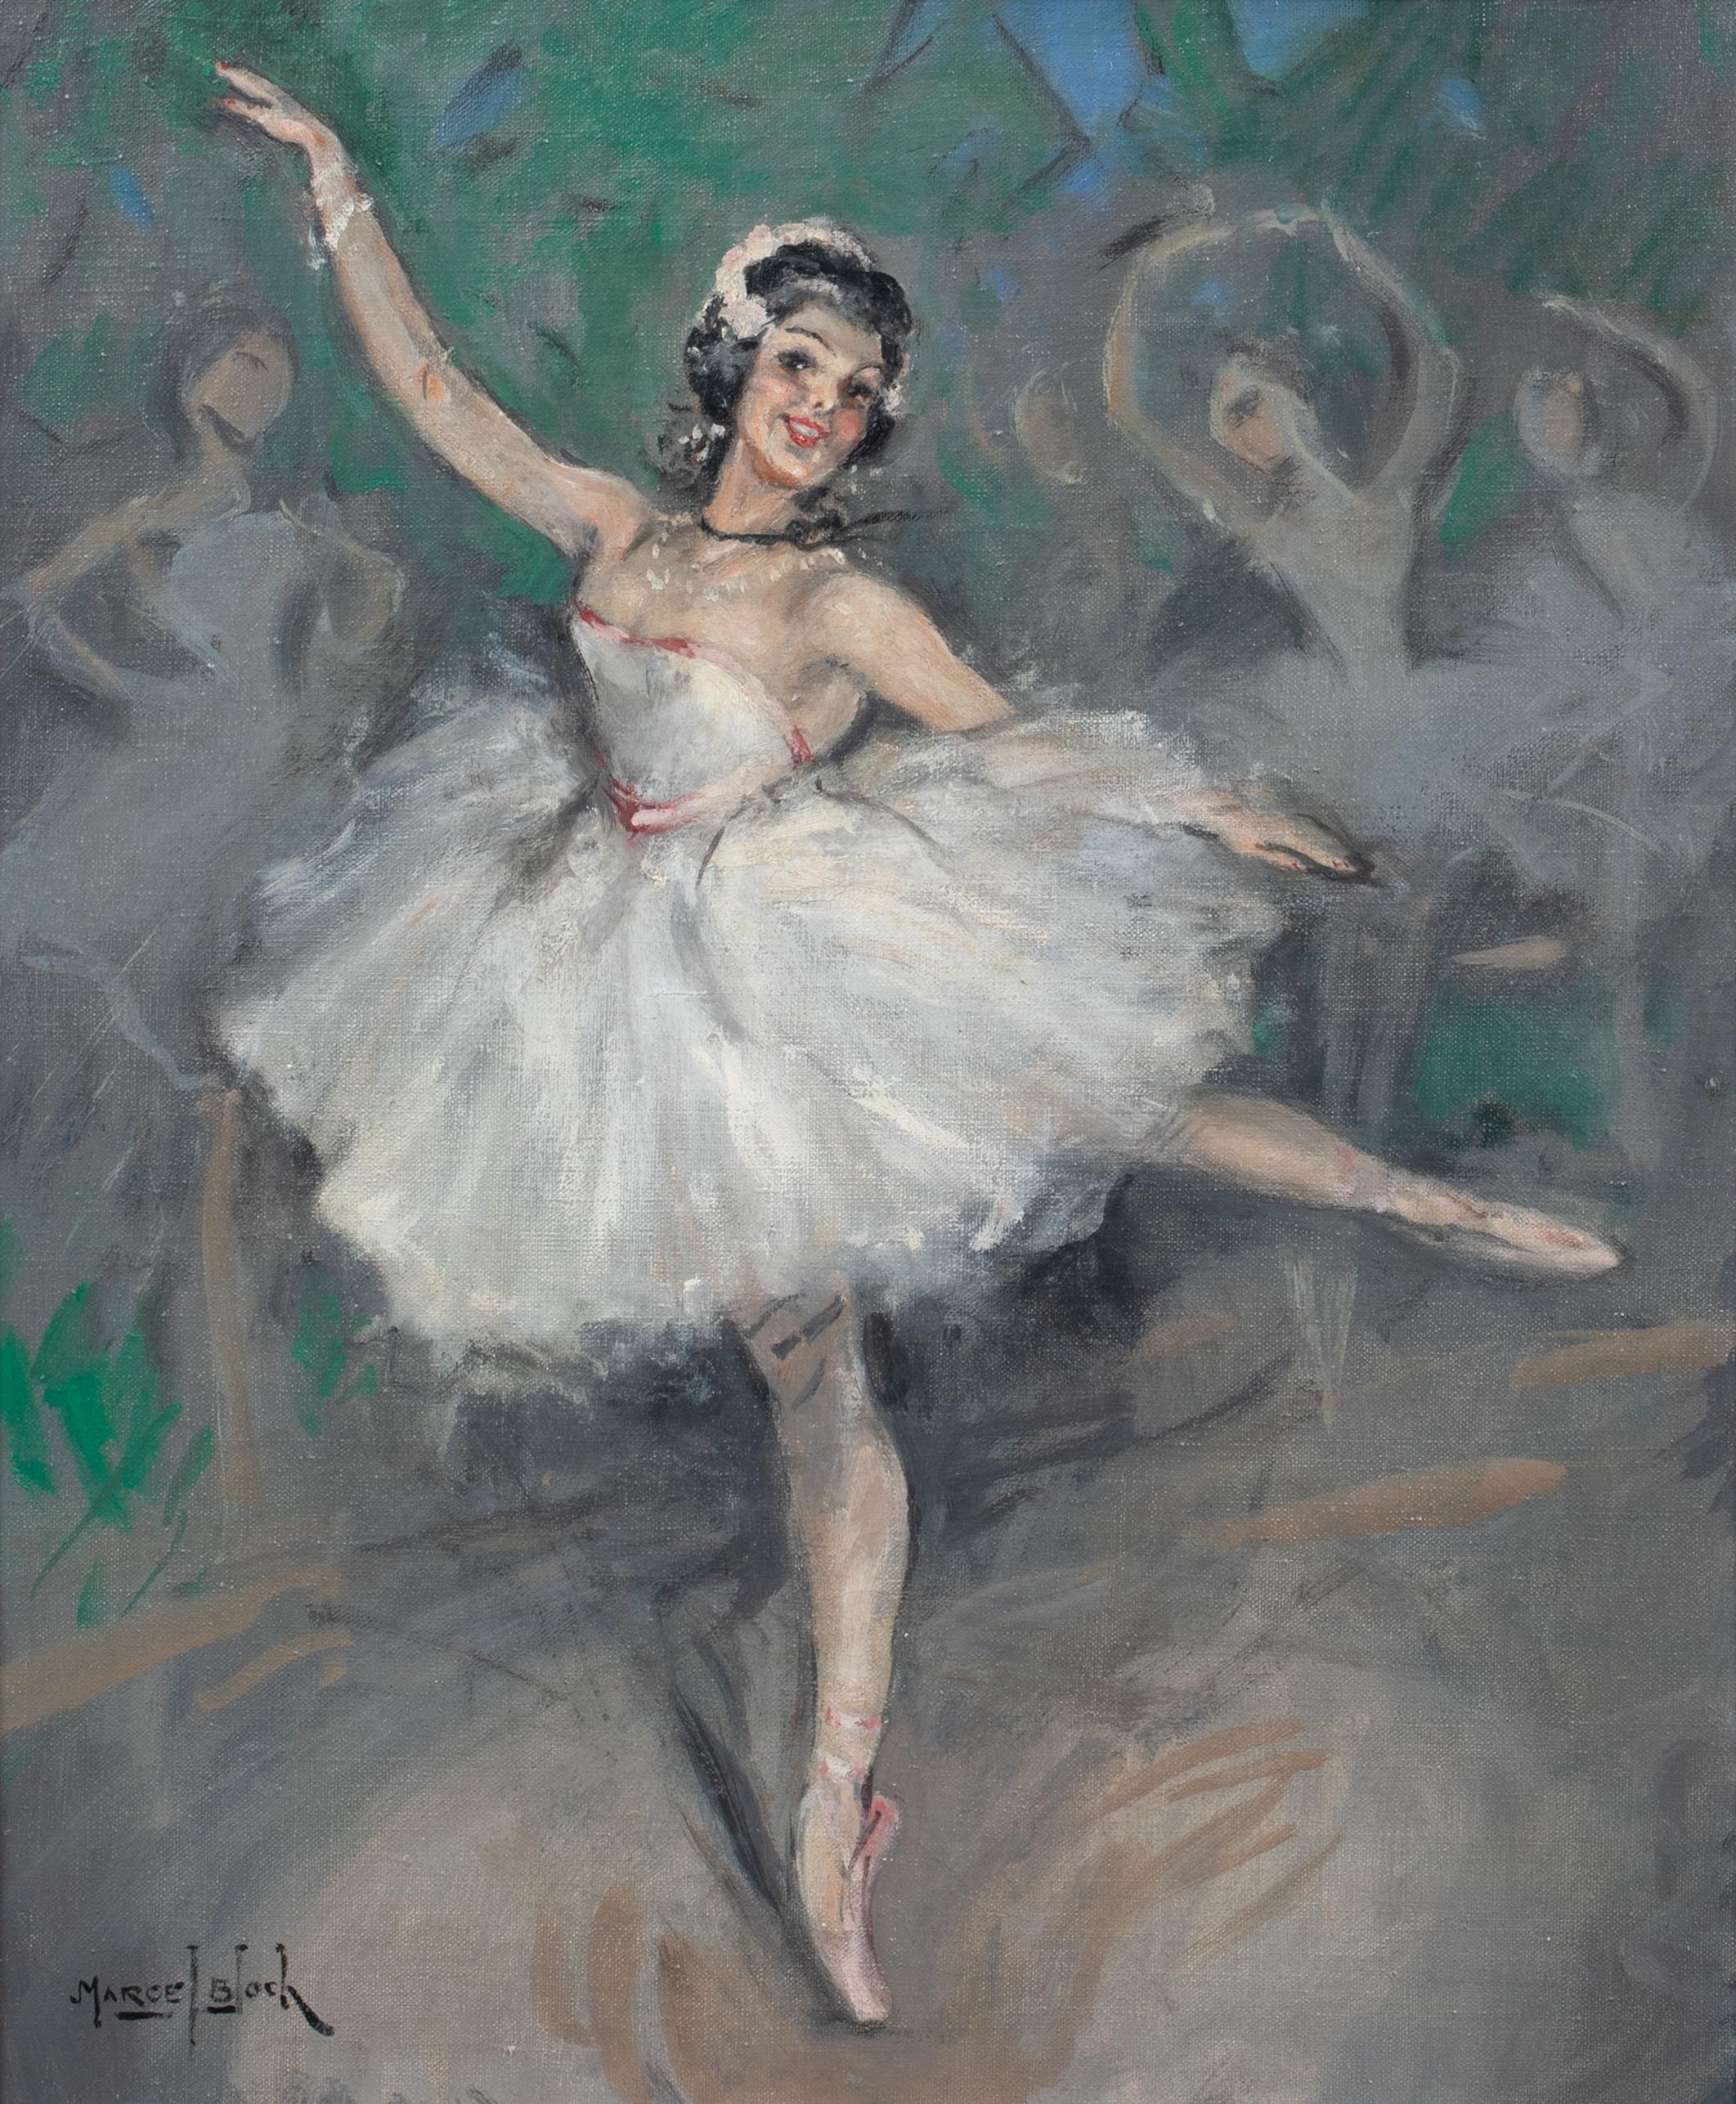 Portrait Of A Ballerina, early 20th Century  by Marcel BLOCH (1882-1966) - Gray Portrait Painting by Marcel Bloch